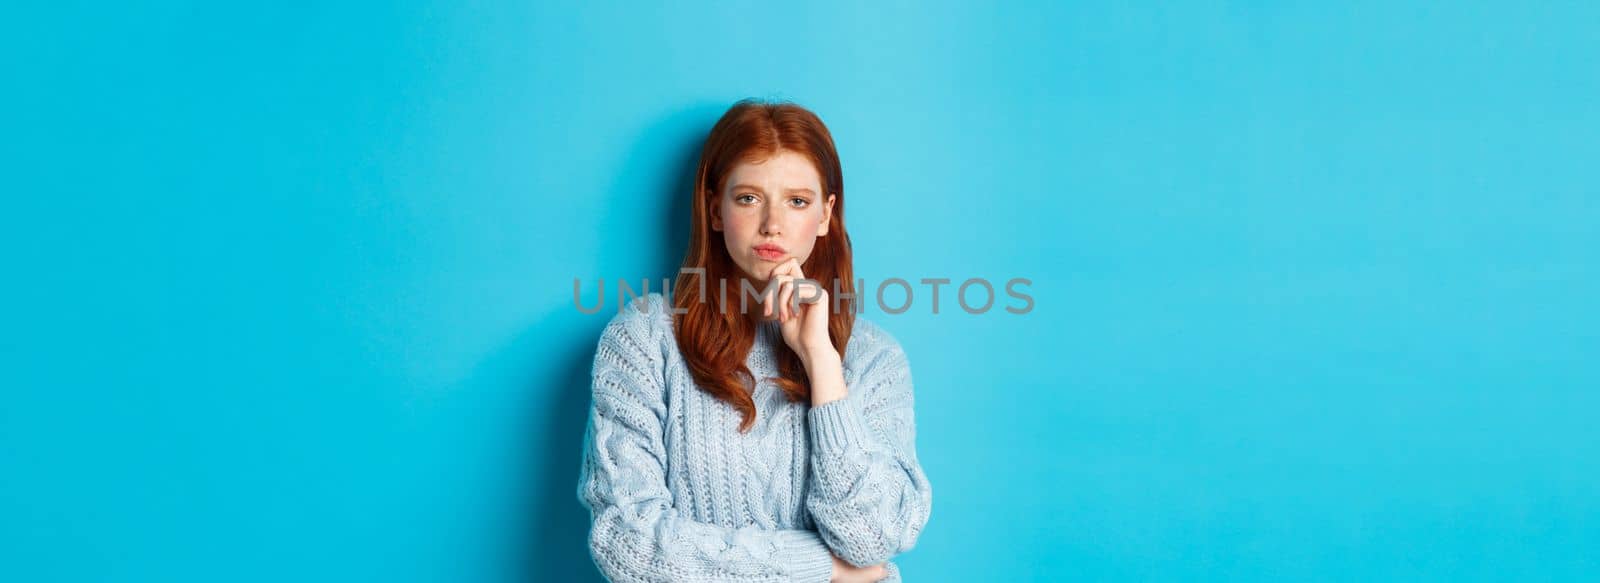 Thoughtful teenage redhead girl staring at camera, pondering ideas, making decision with serious face, standing over blue background.